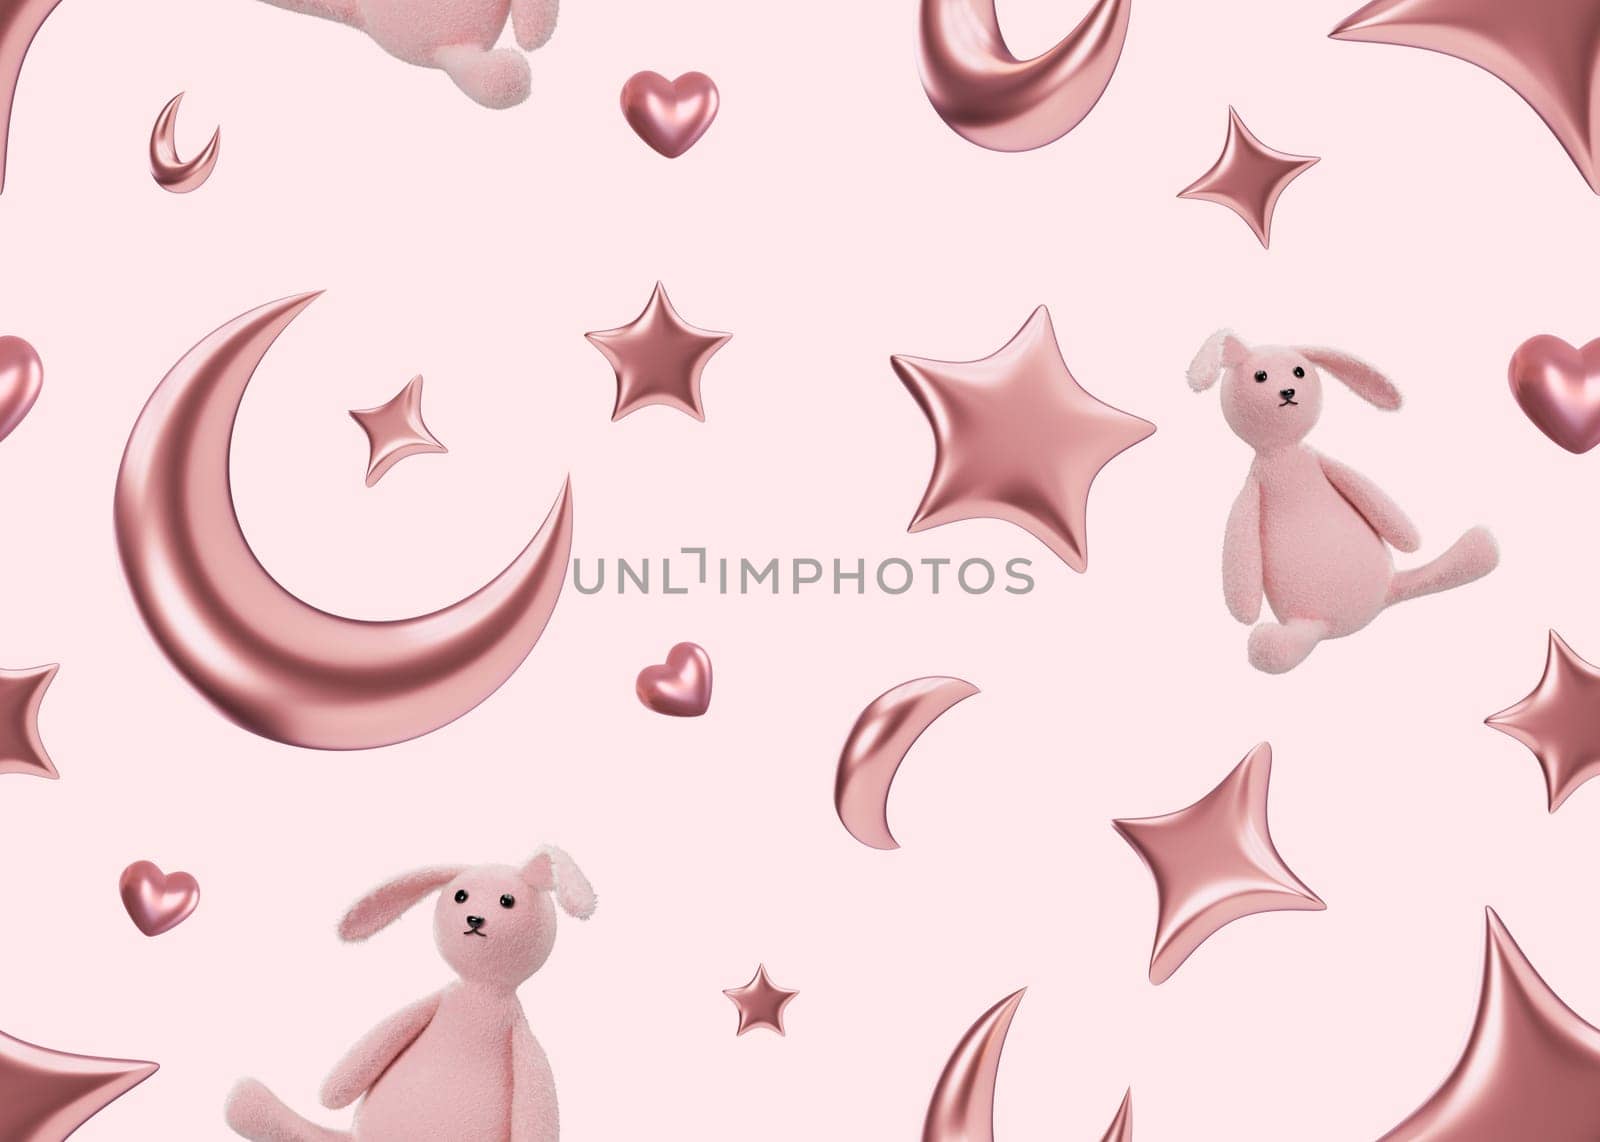 Pink seamless pattern with stars, moons and bunnies. Applicable for fabric print, textile, wallpaper, gifts wrapping paper. Repeatable texture. Modern style, pattern for girls bedding, clothes. 3D